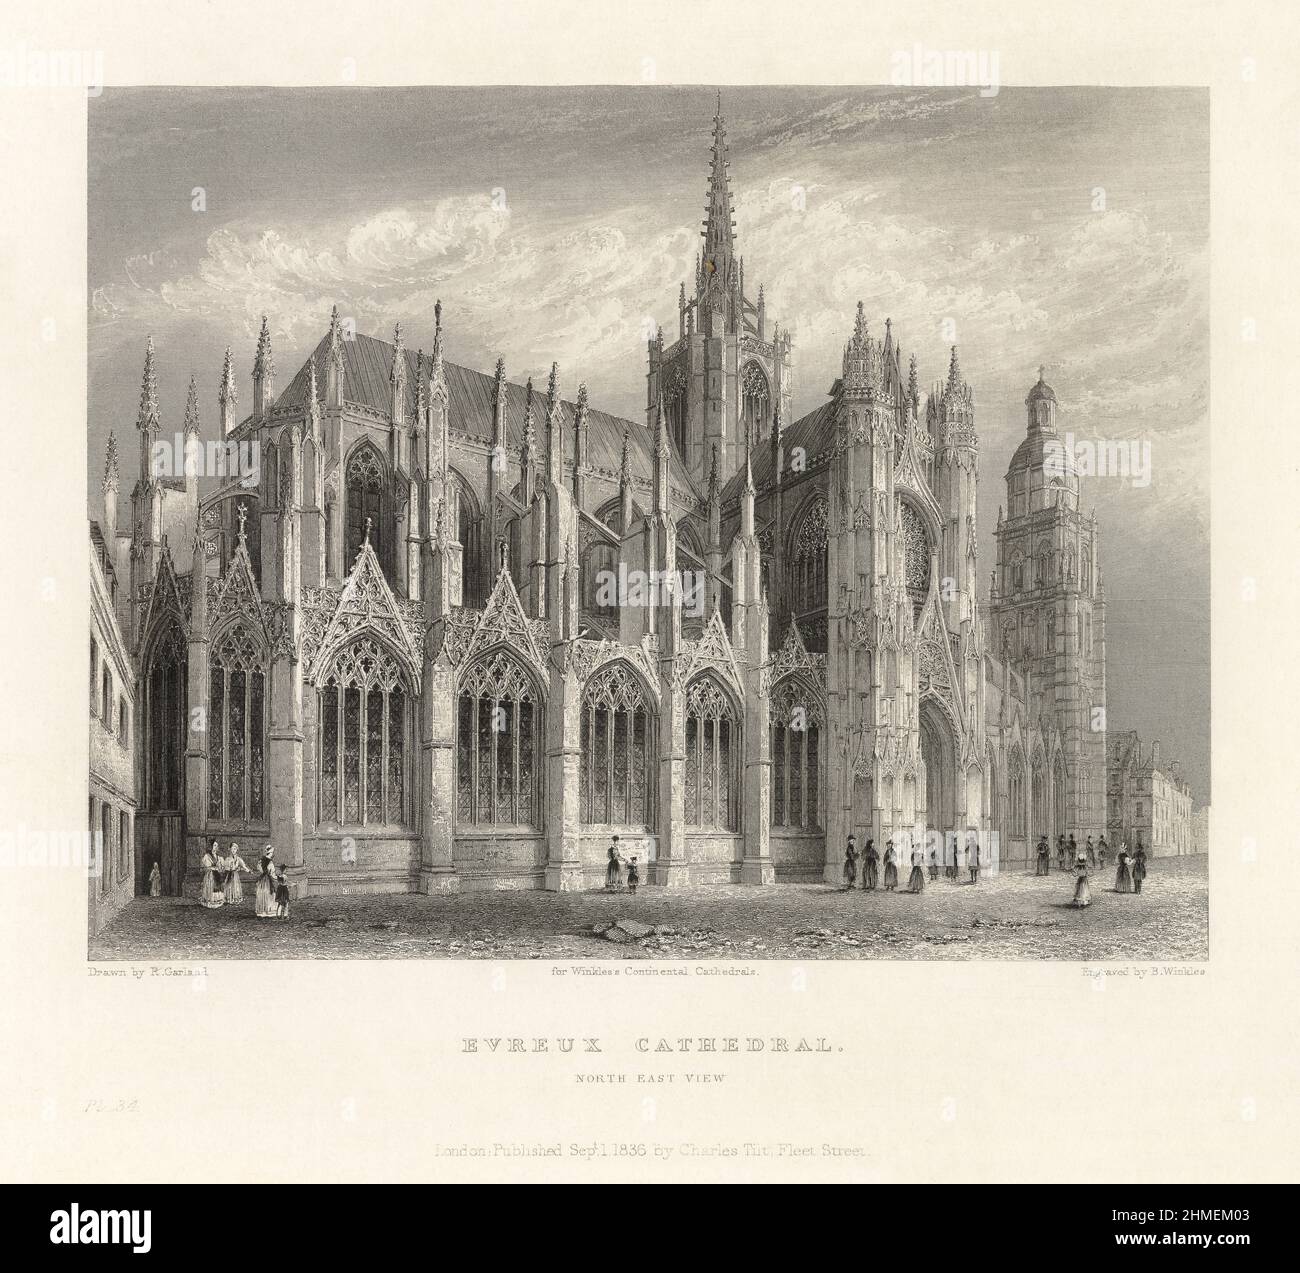 French Cathedral, Evreux Cathedral, Beauvais, Oise, Evreux, Antique French Engraving, 1837 Stock Photo